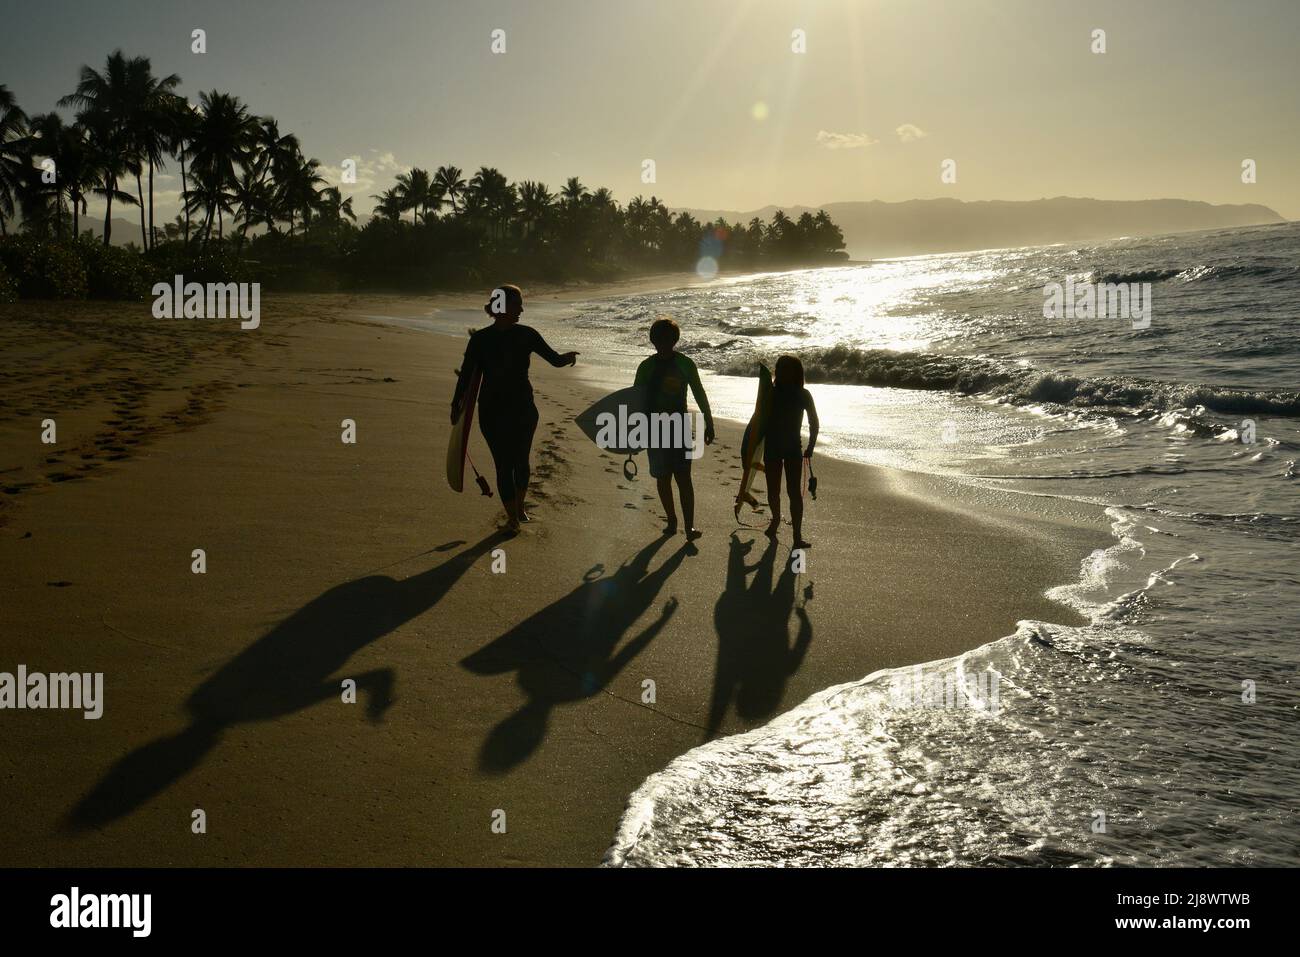 Silhouette of mother and two children walking along beach after surfing during sunset, Haleiwa, Hawaii, USA Stock Photo